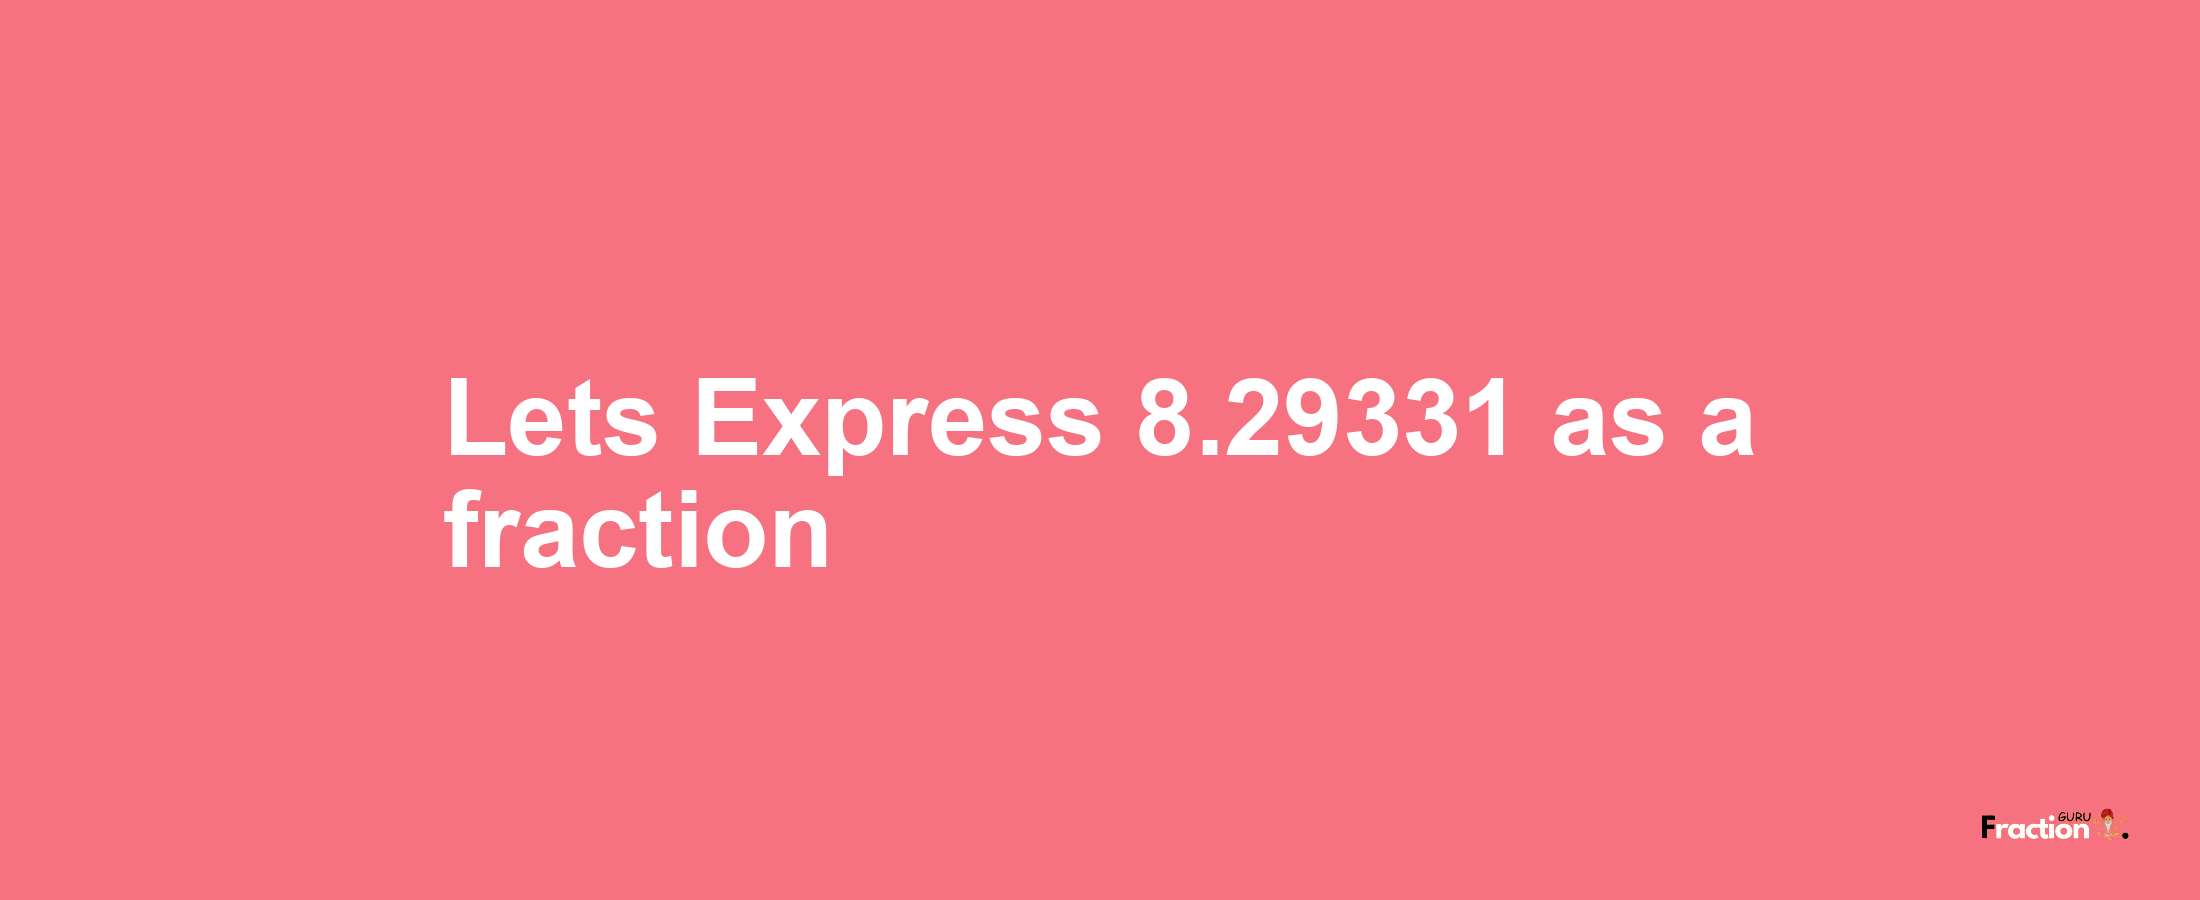 Lets Express 8.29331 as afraction